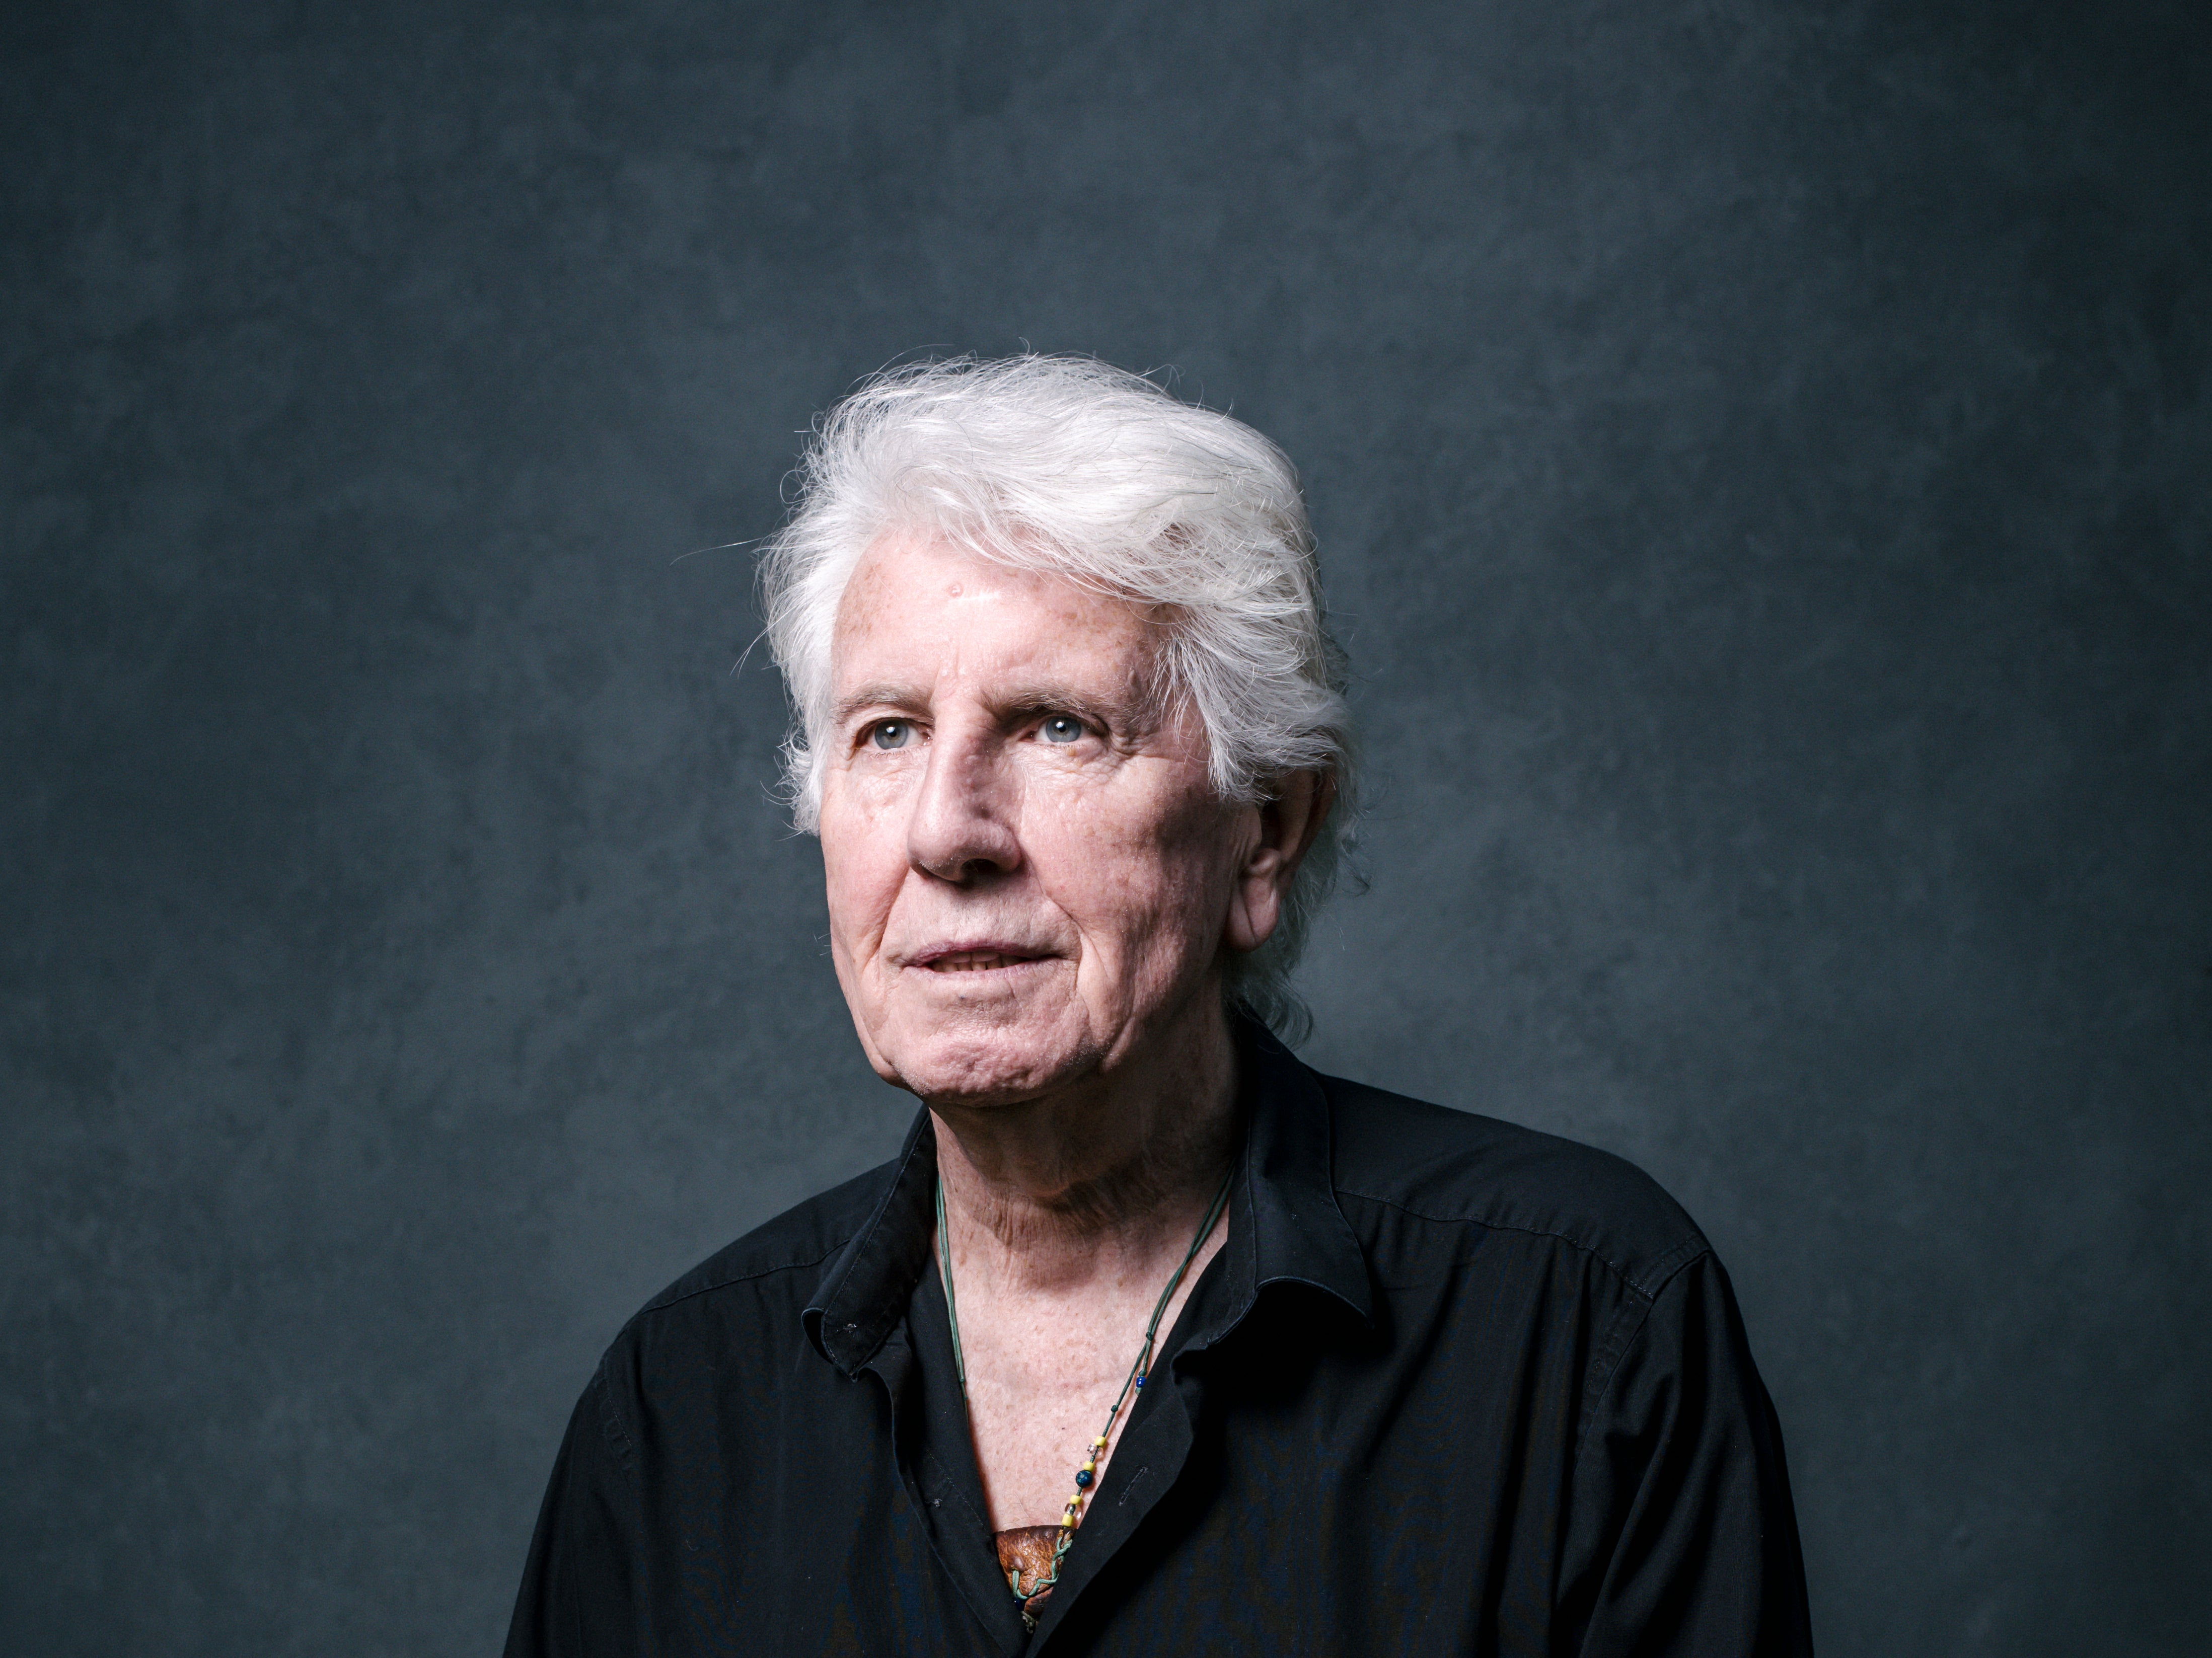 Graham Nash has withdrawn his music from Spotify in protest against podcaster Joe Rogan